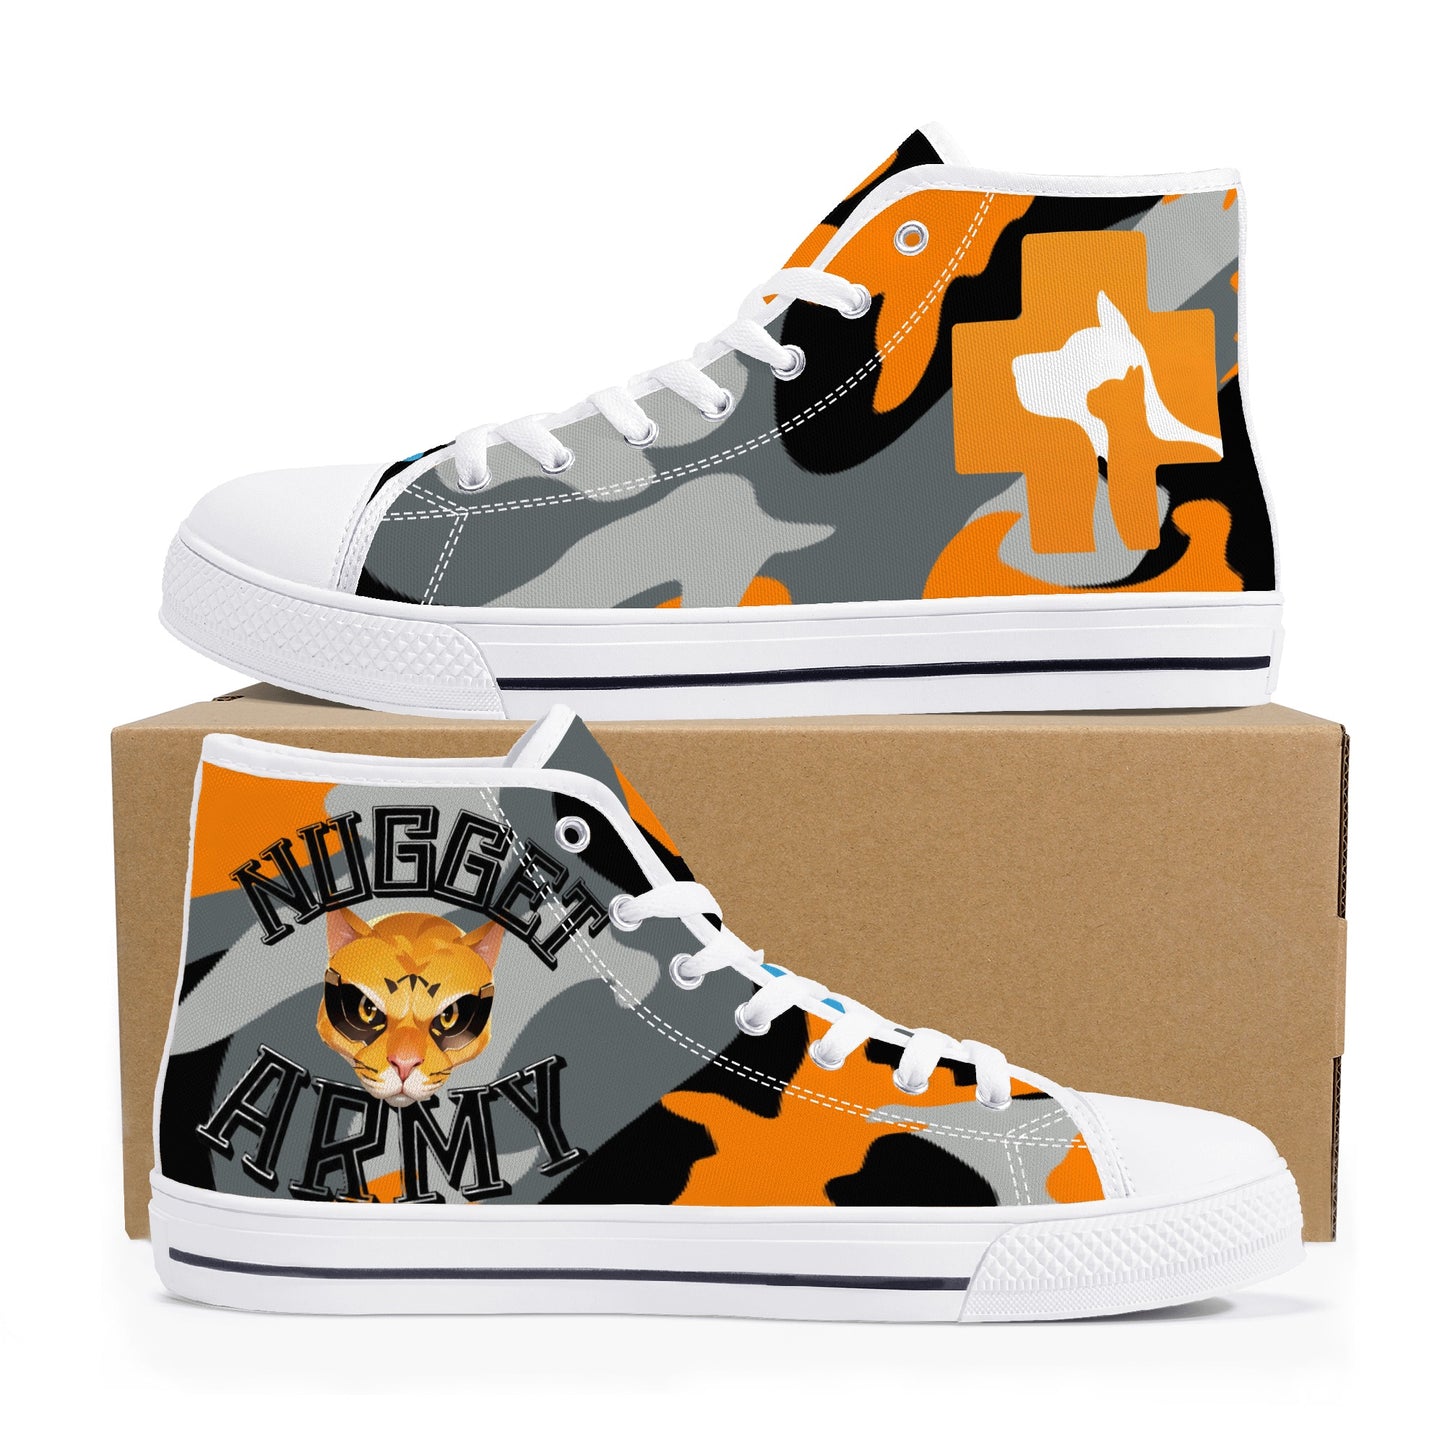 Stand out  with the  Nugget Army Vets Womens High Top Canvas Shoes  available at Hey Nugget. Grab yours today!